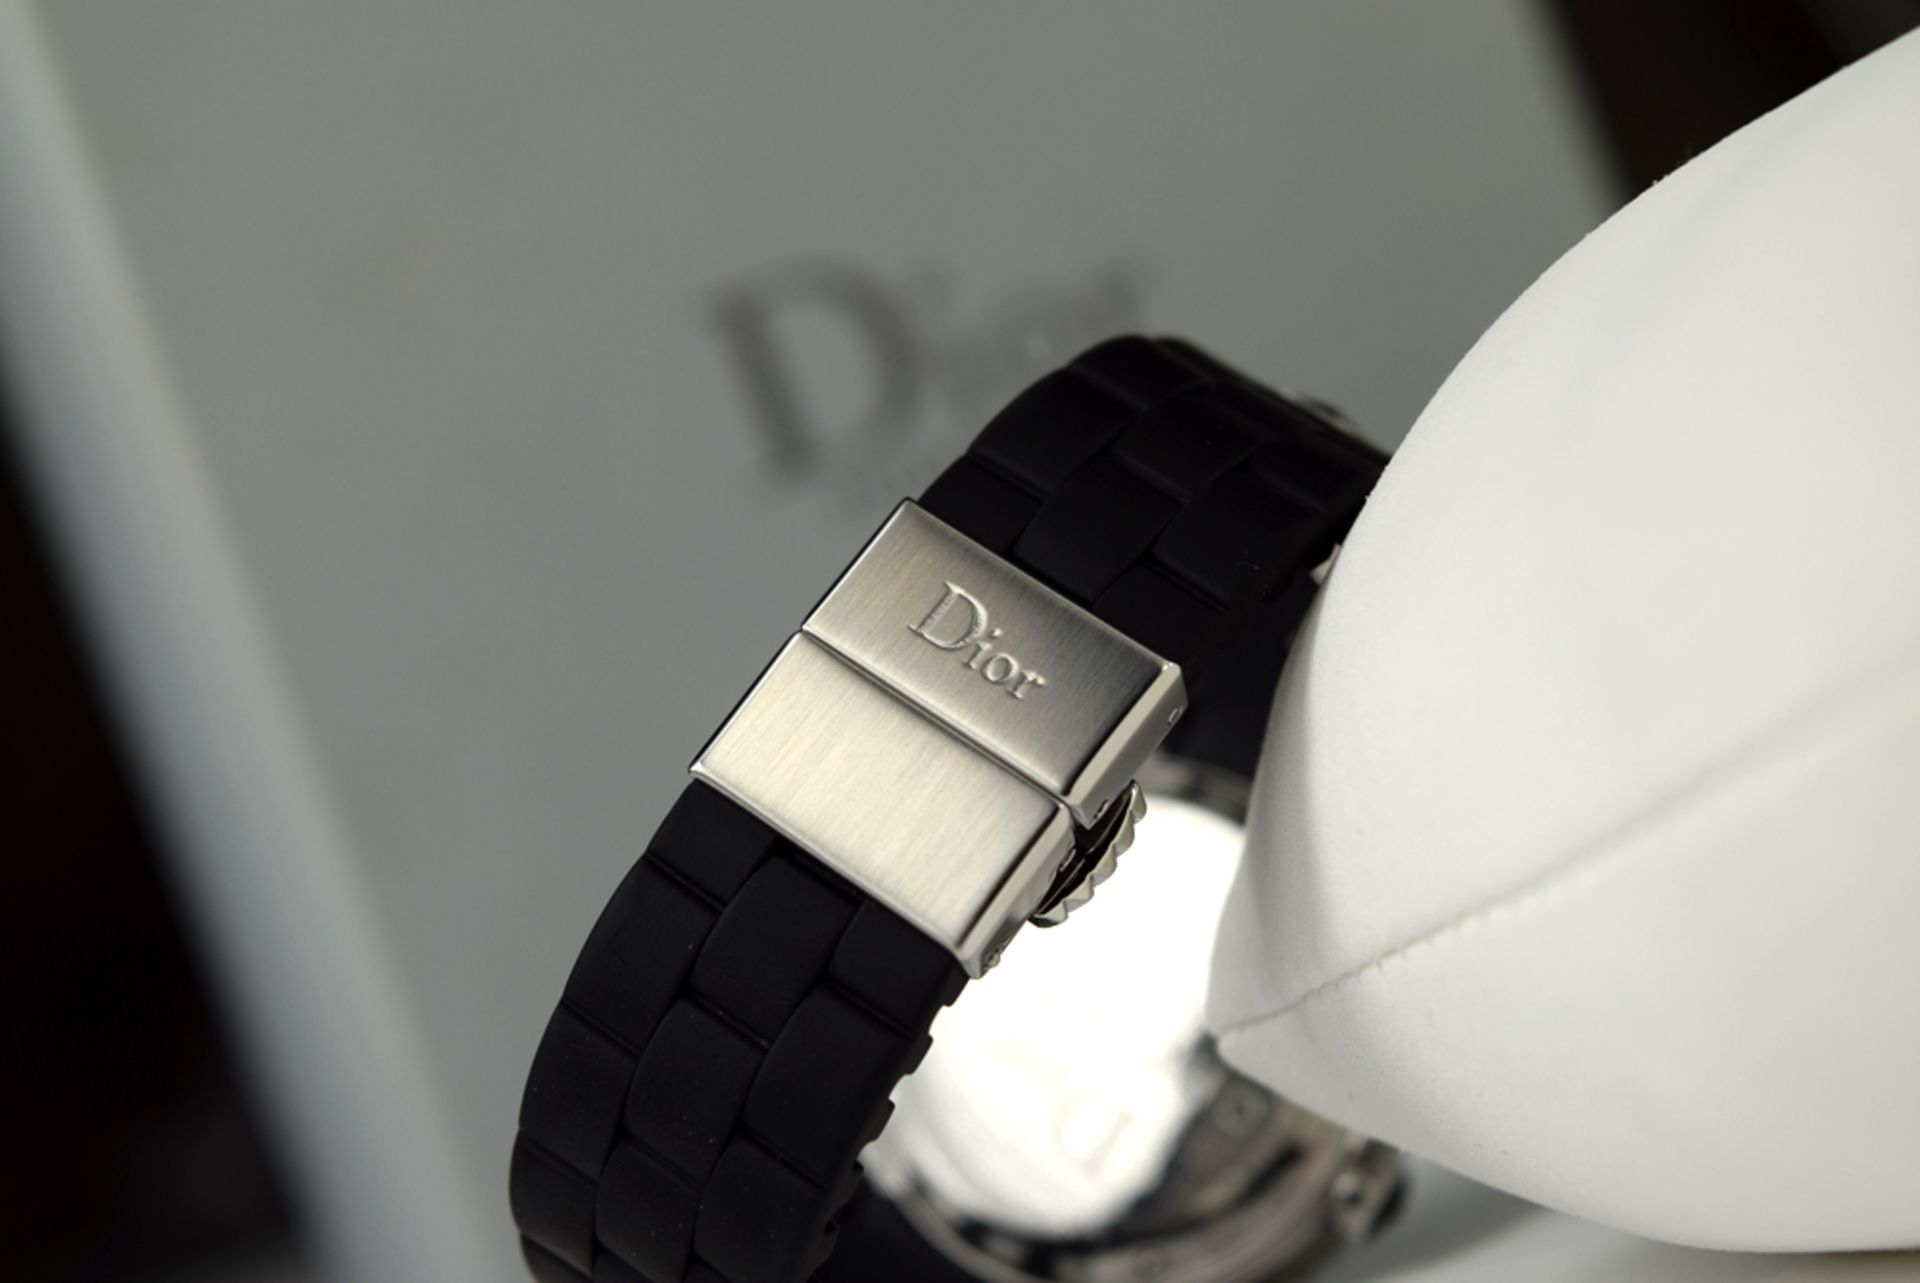 DIOR 'CHRISTAL' - CD11311FR001 Stainless Steel - Image 2 of 10